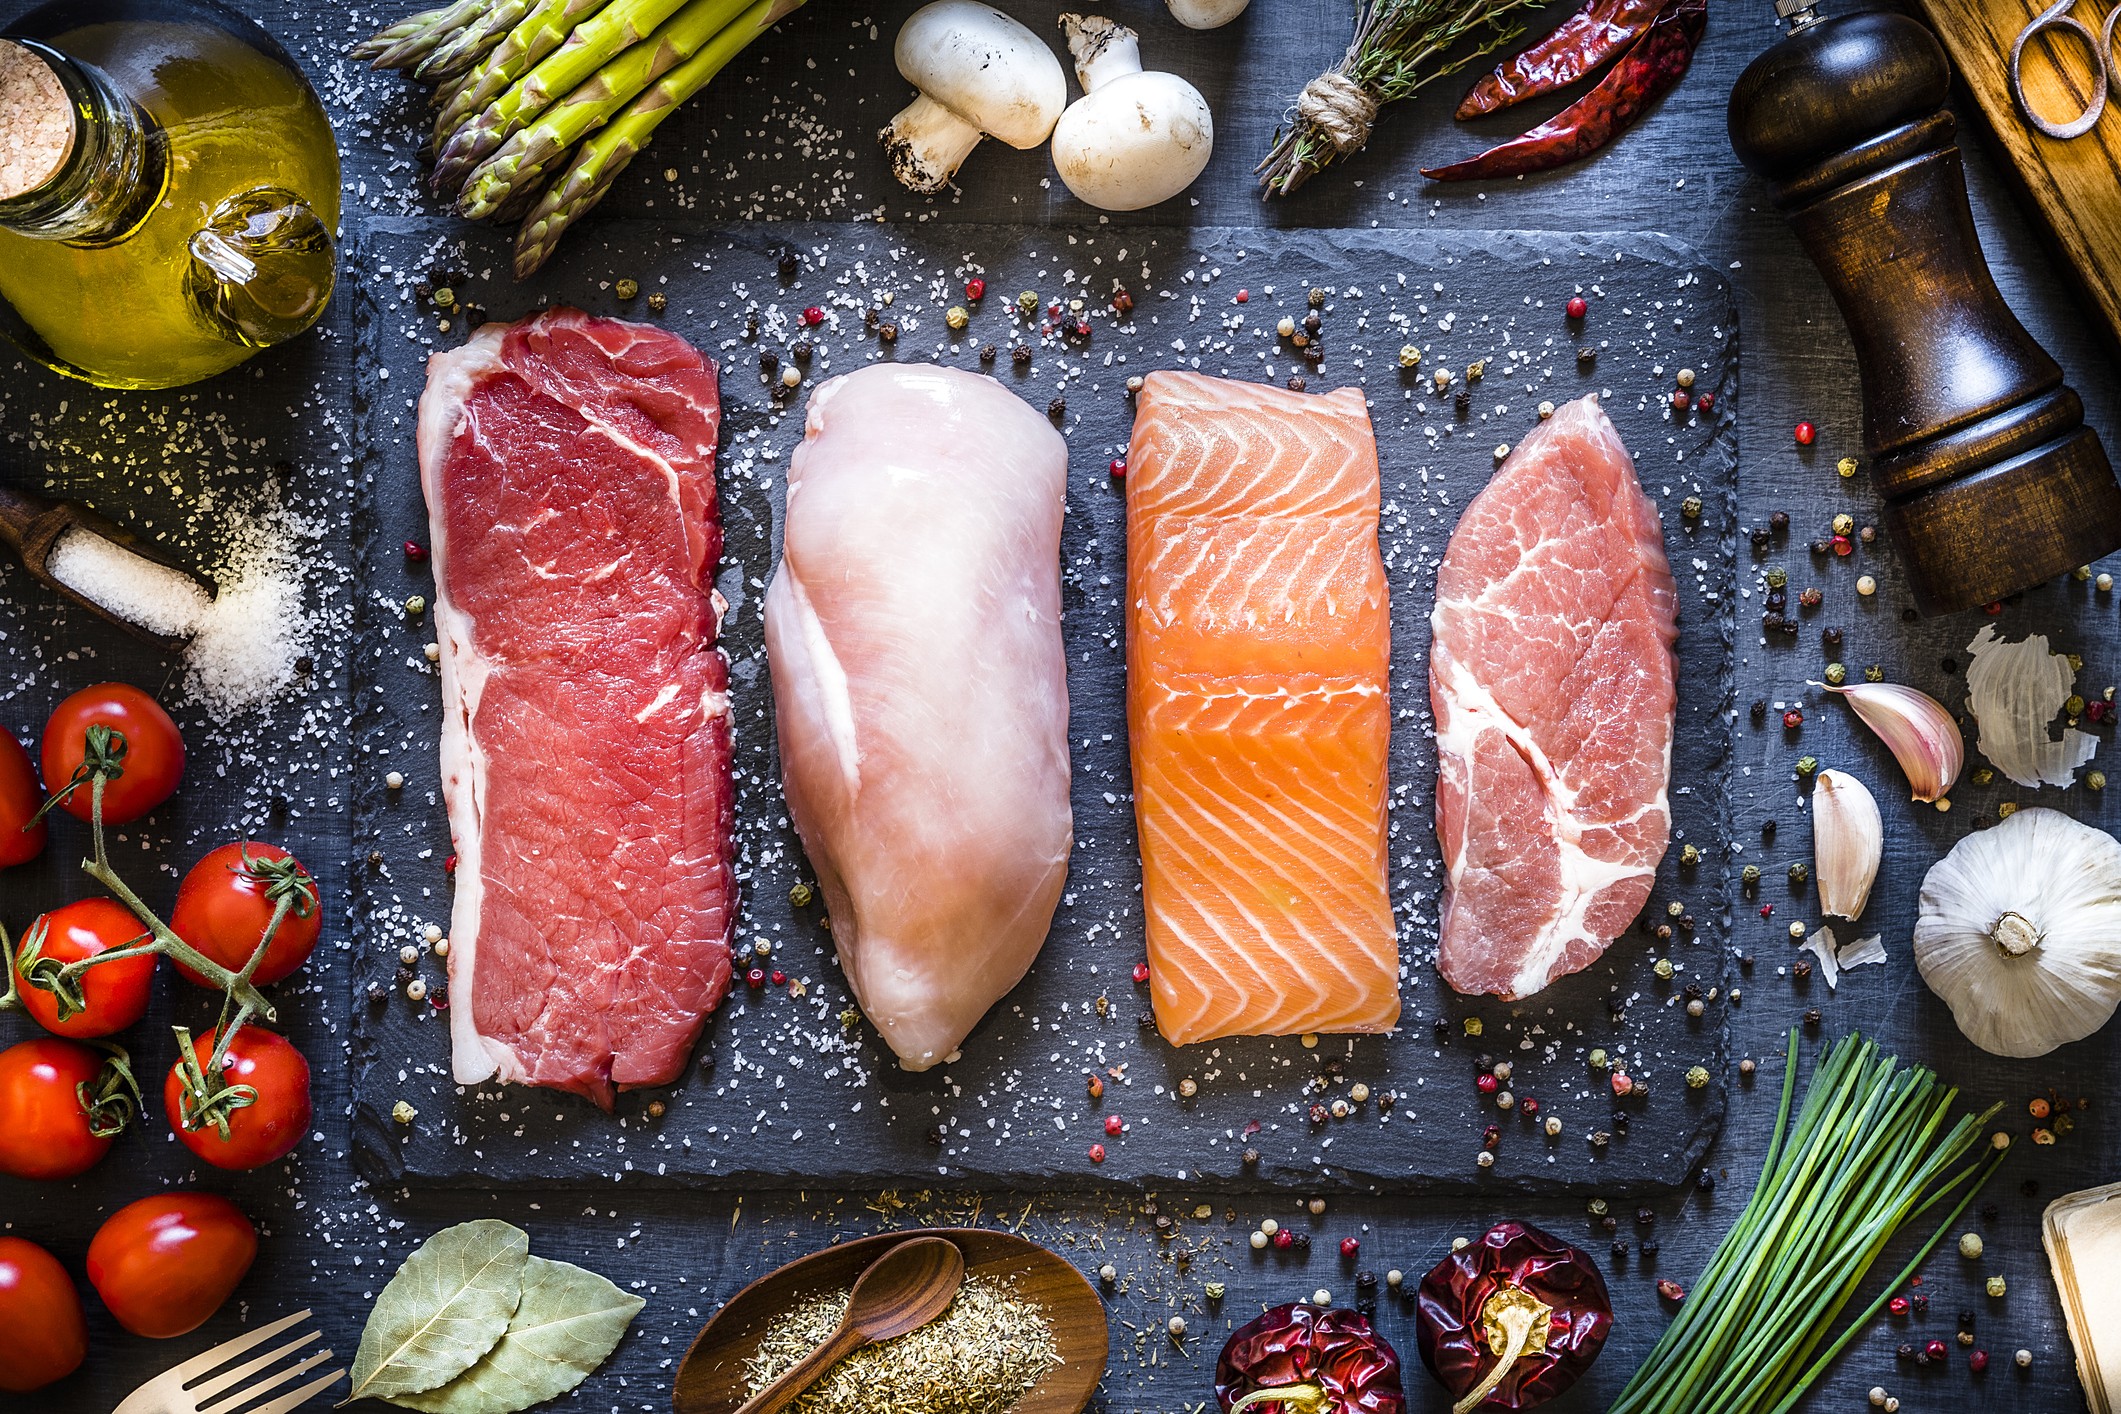 Top view of four different types of animal protein like a raw beef steak, a raw chicken breast, a raw salmon fillet and a raw pork steak on a stone tray. Stone tray is at the center of the image and is surrounded by condiments, spices and vegetables. Low  (Foto: Getty Images)